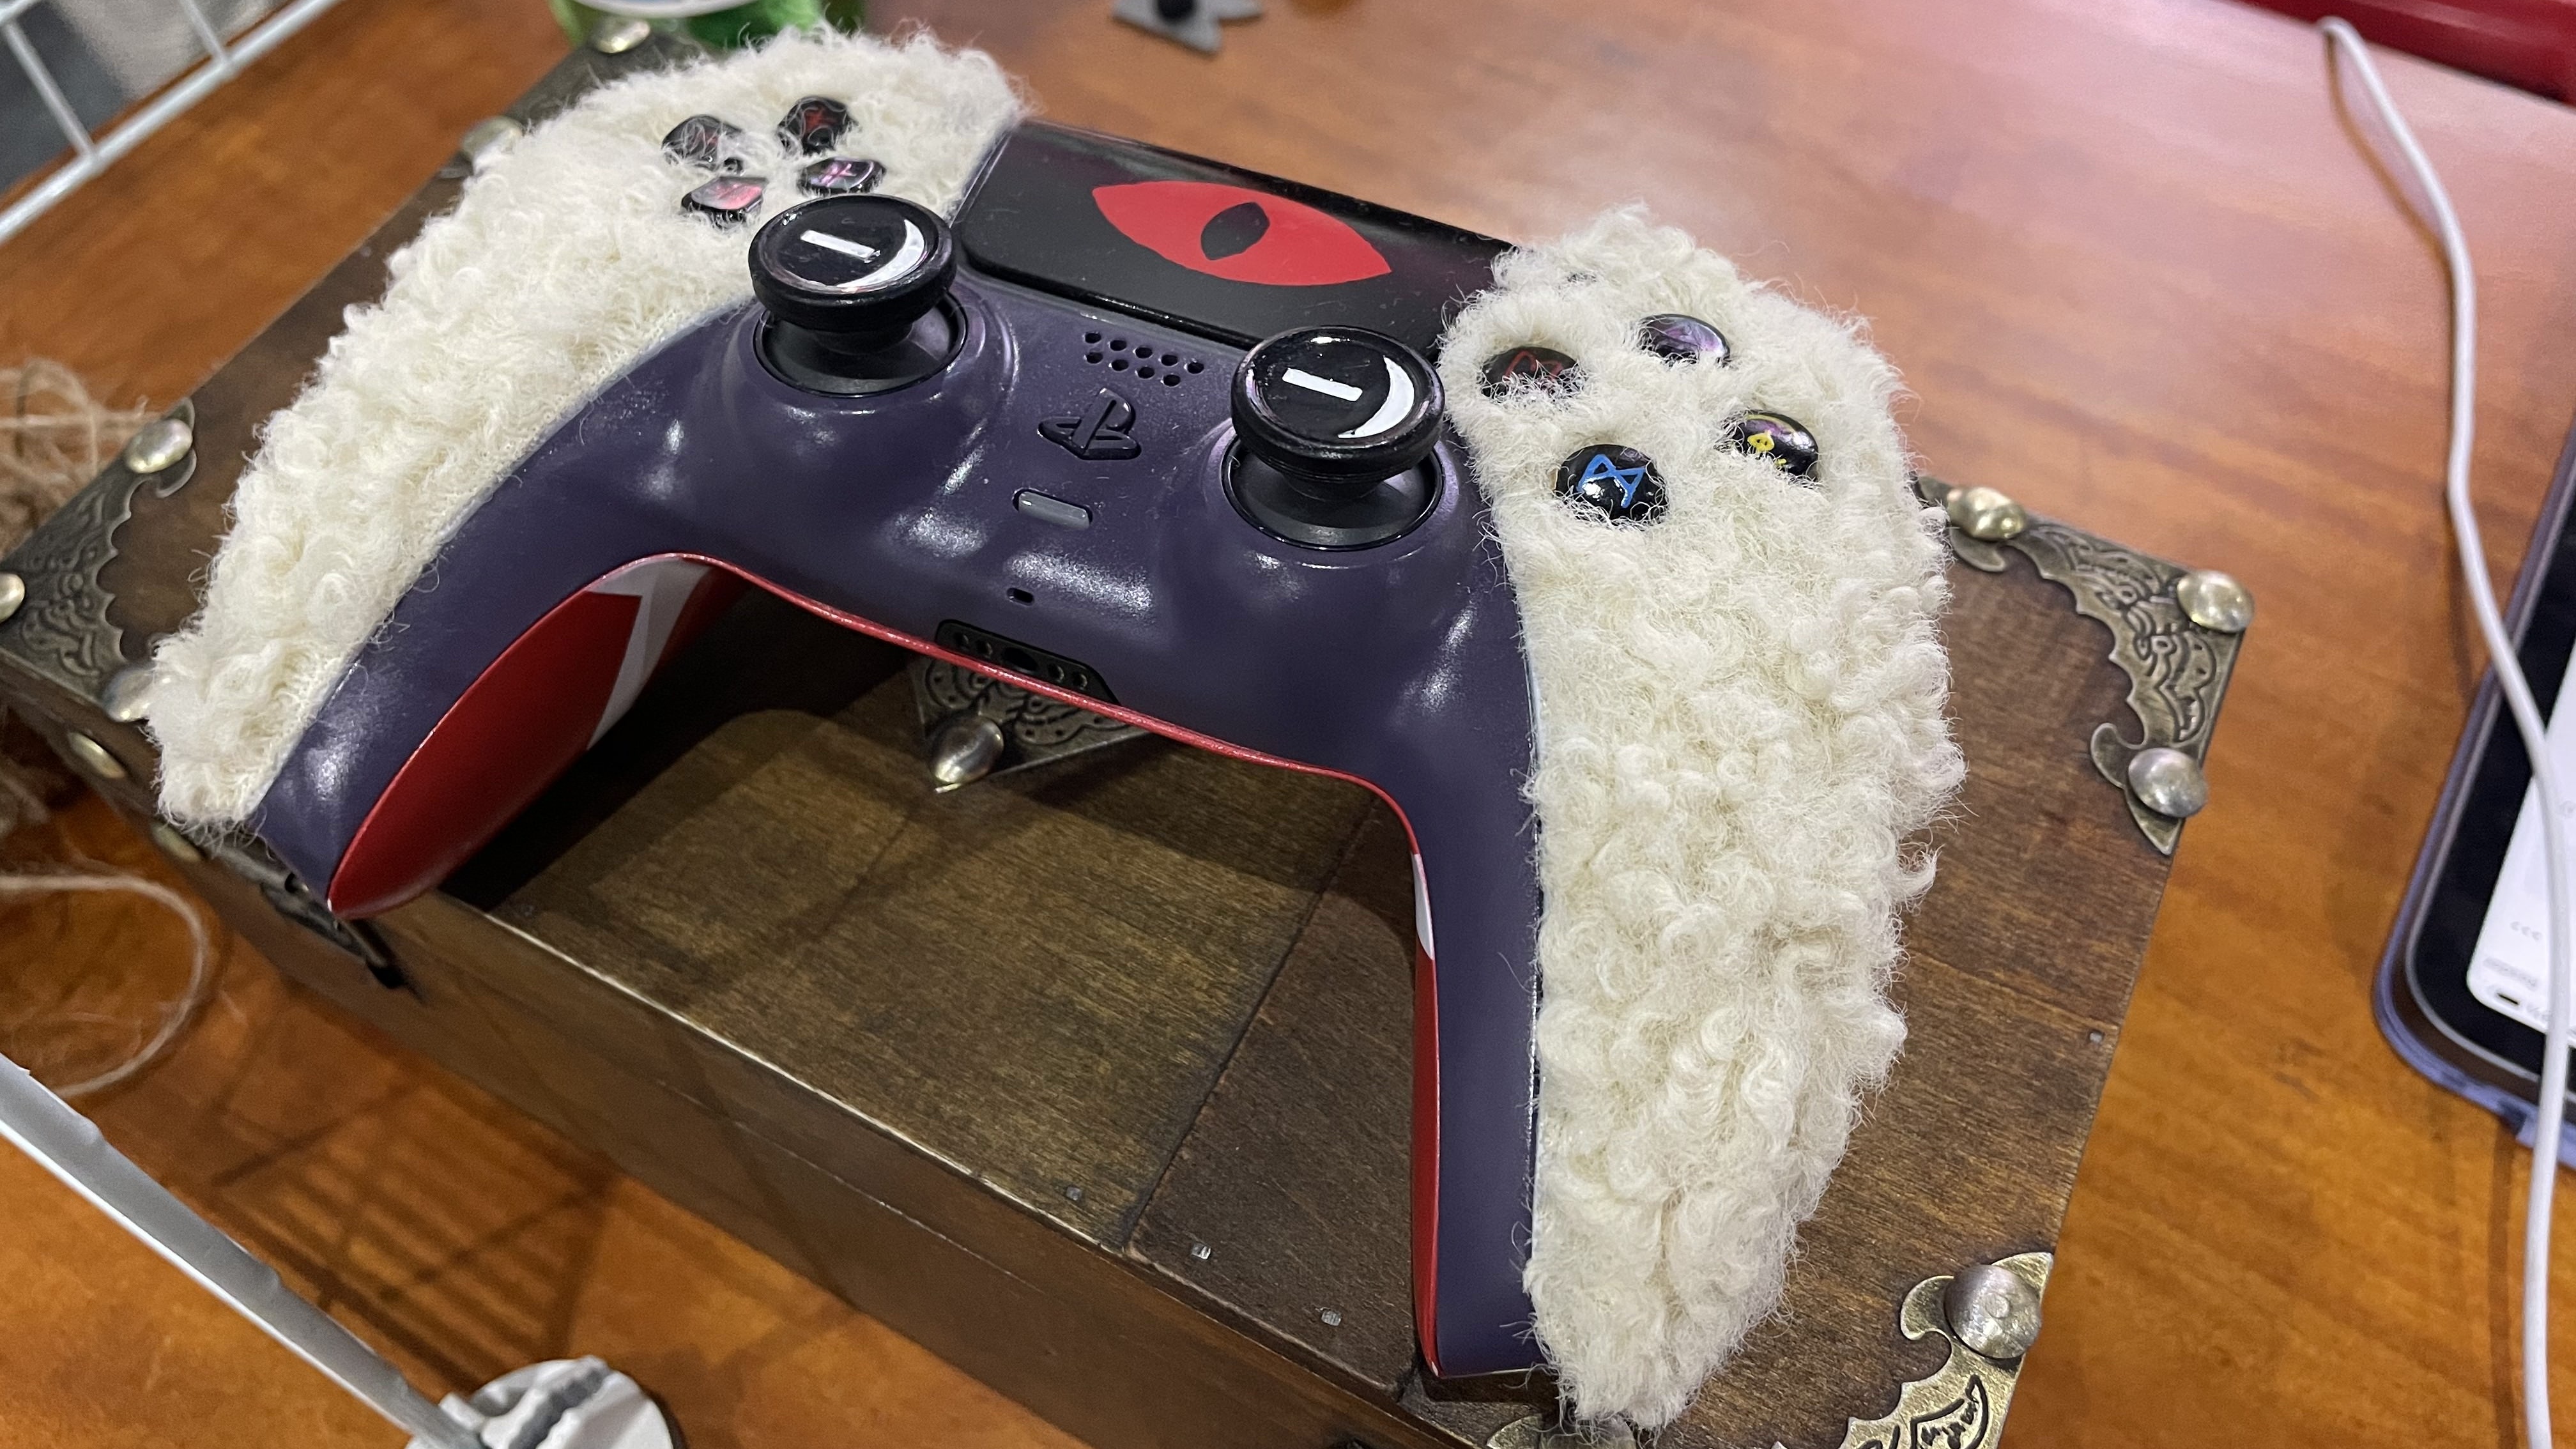 The Cult of the Lamb game console for the PlayStation.